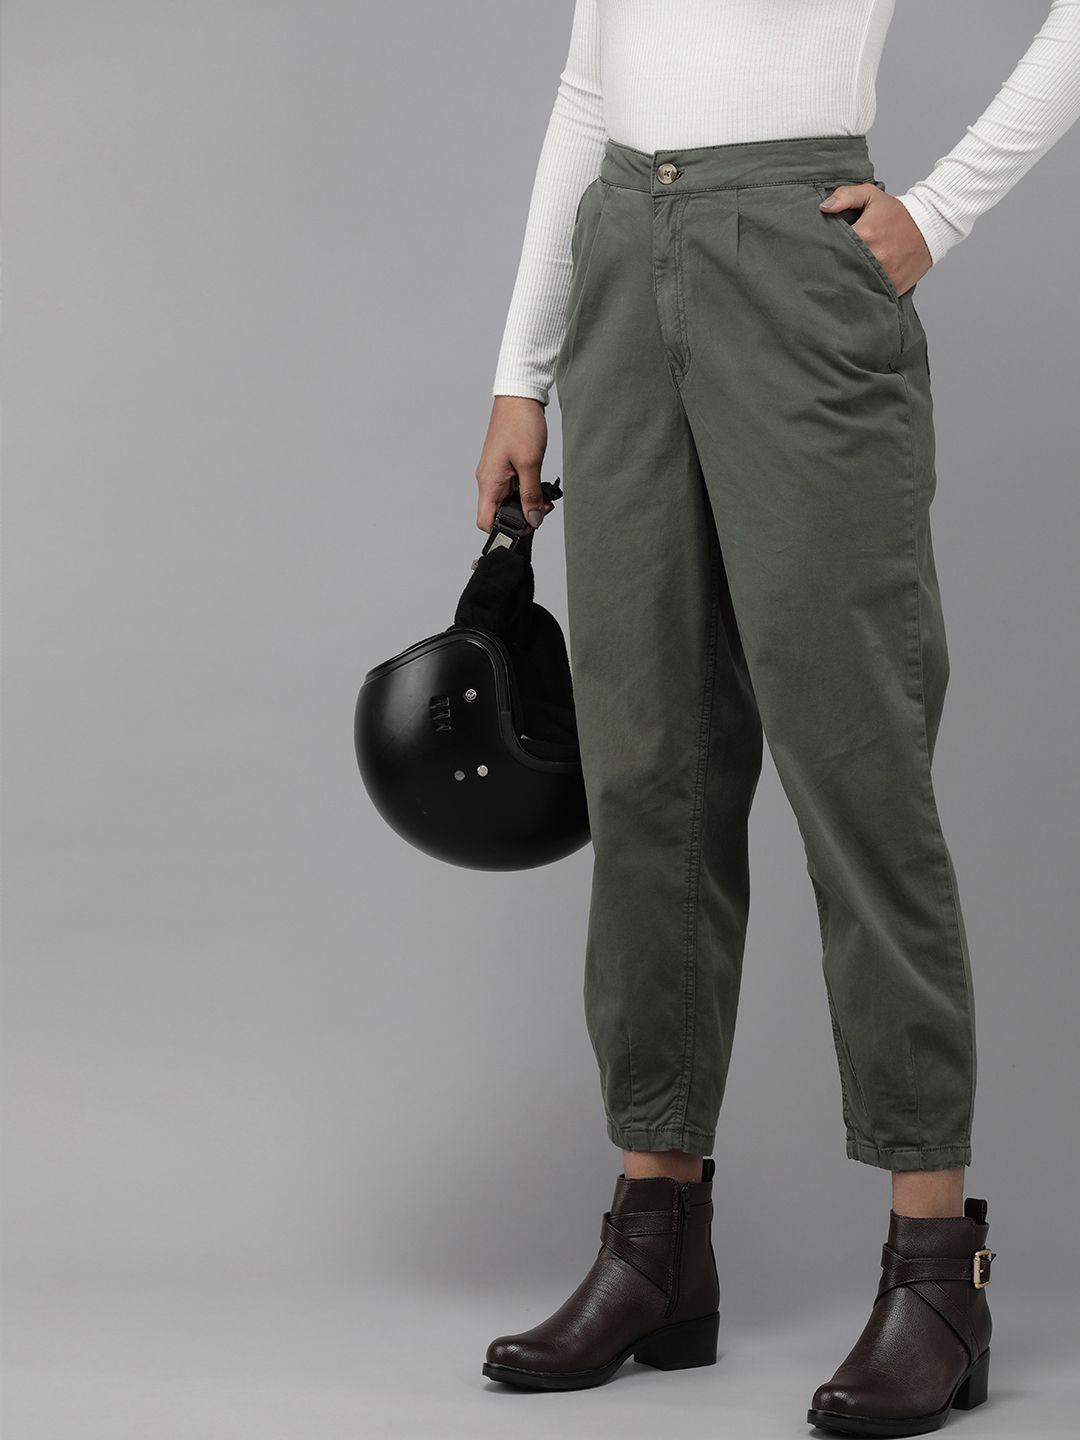 The Roadster Lifestyle Co. Women Cropped Trousers Price in India